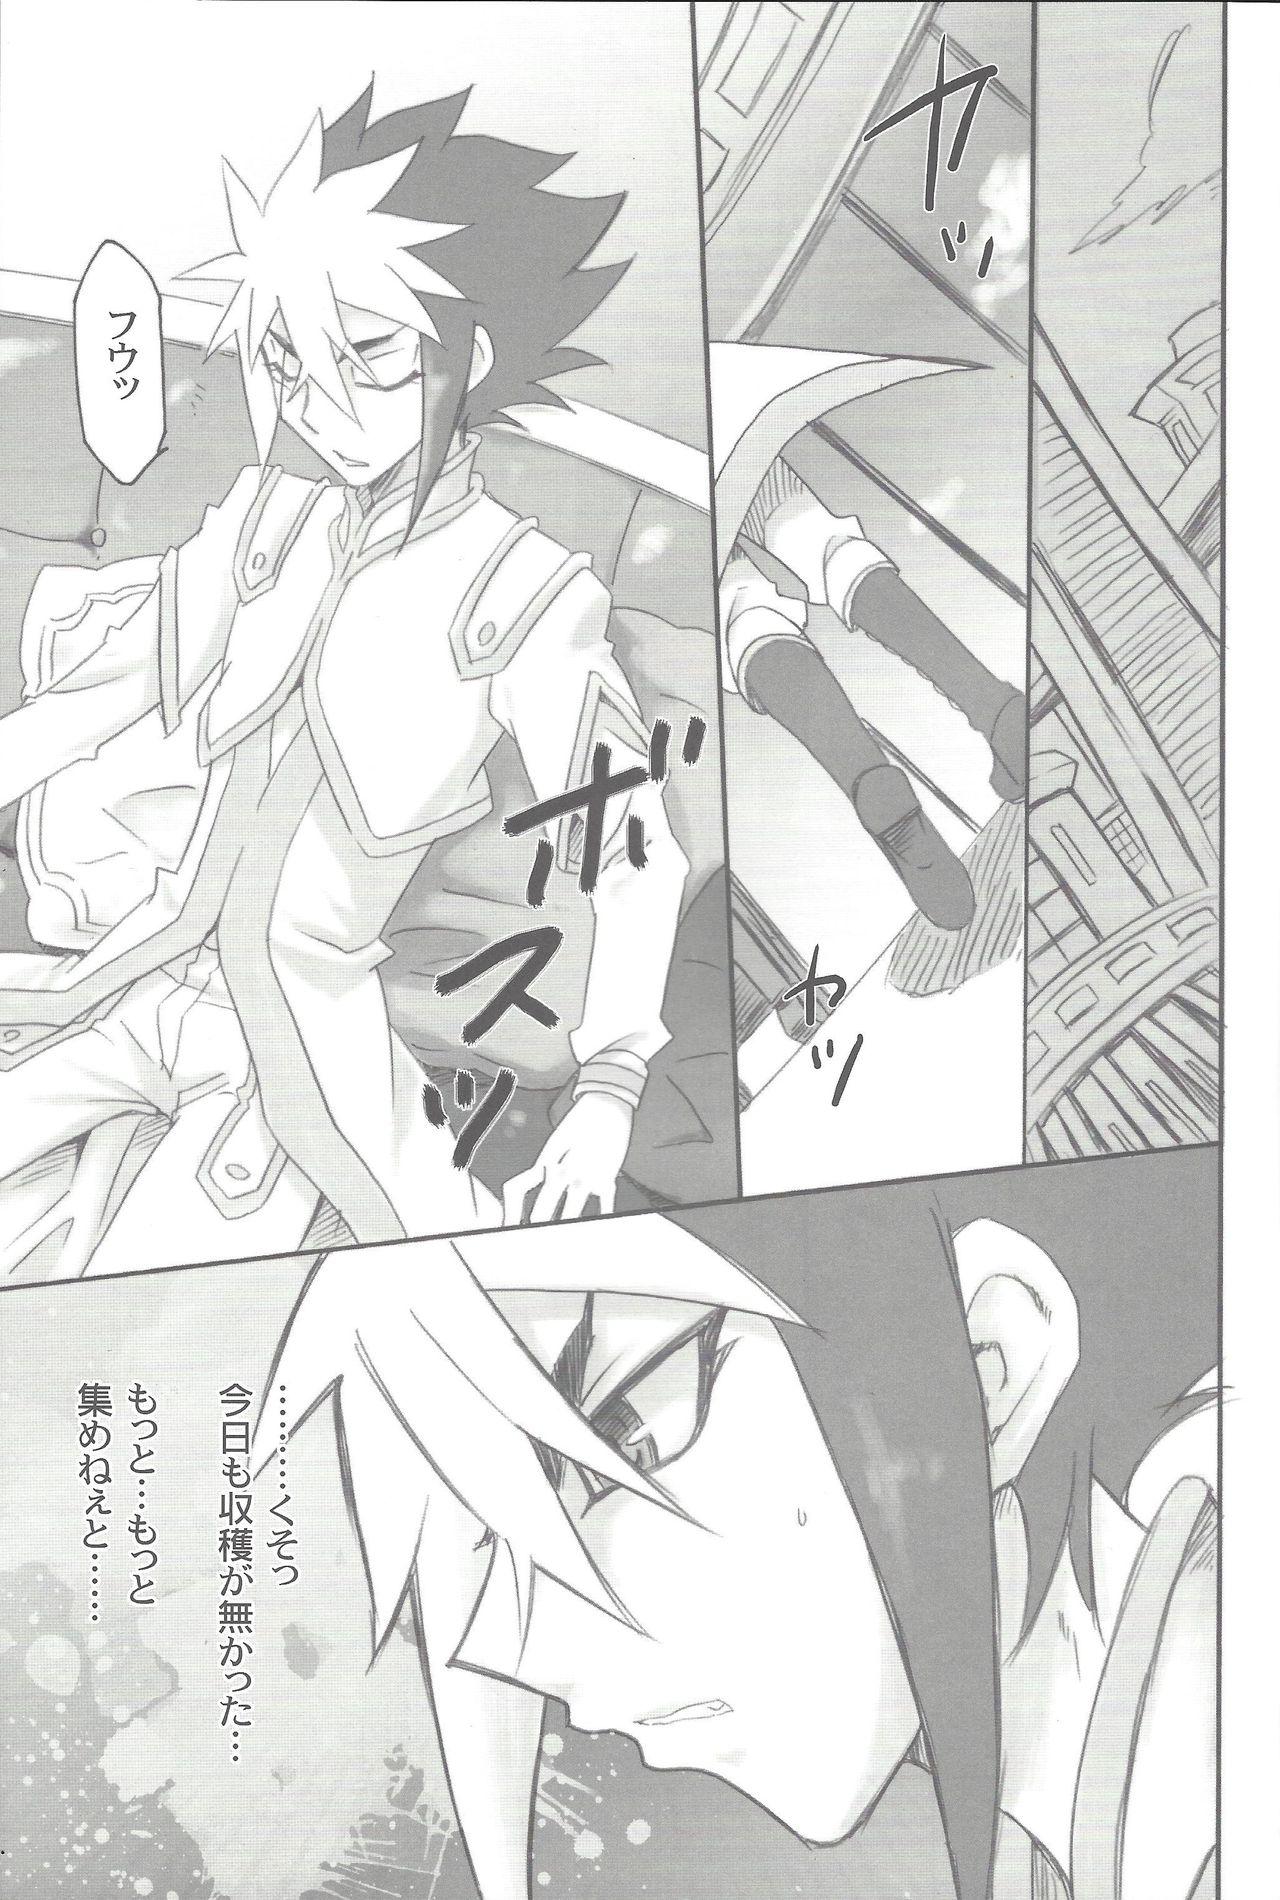 Pussy Fuck Anata to Waltz - Yu-gi-oh zexal Group Sex - Page 4